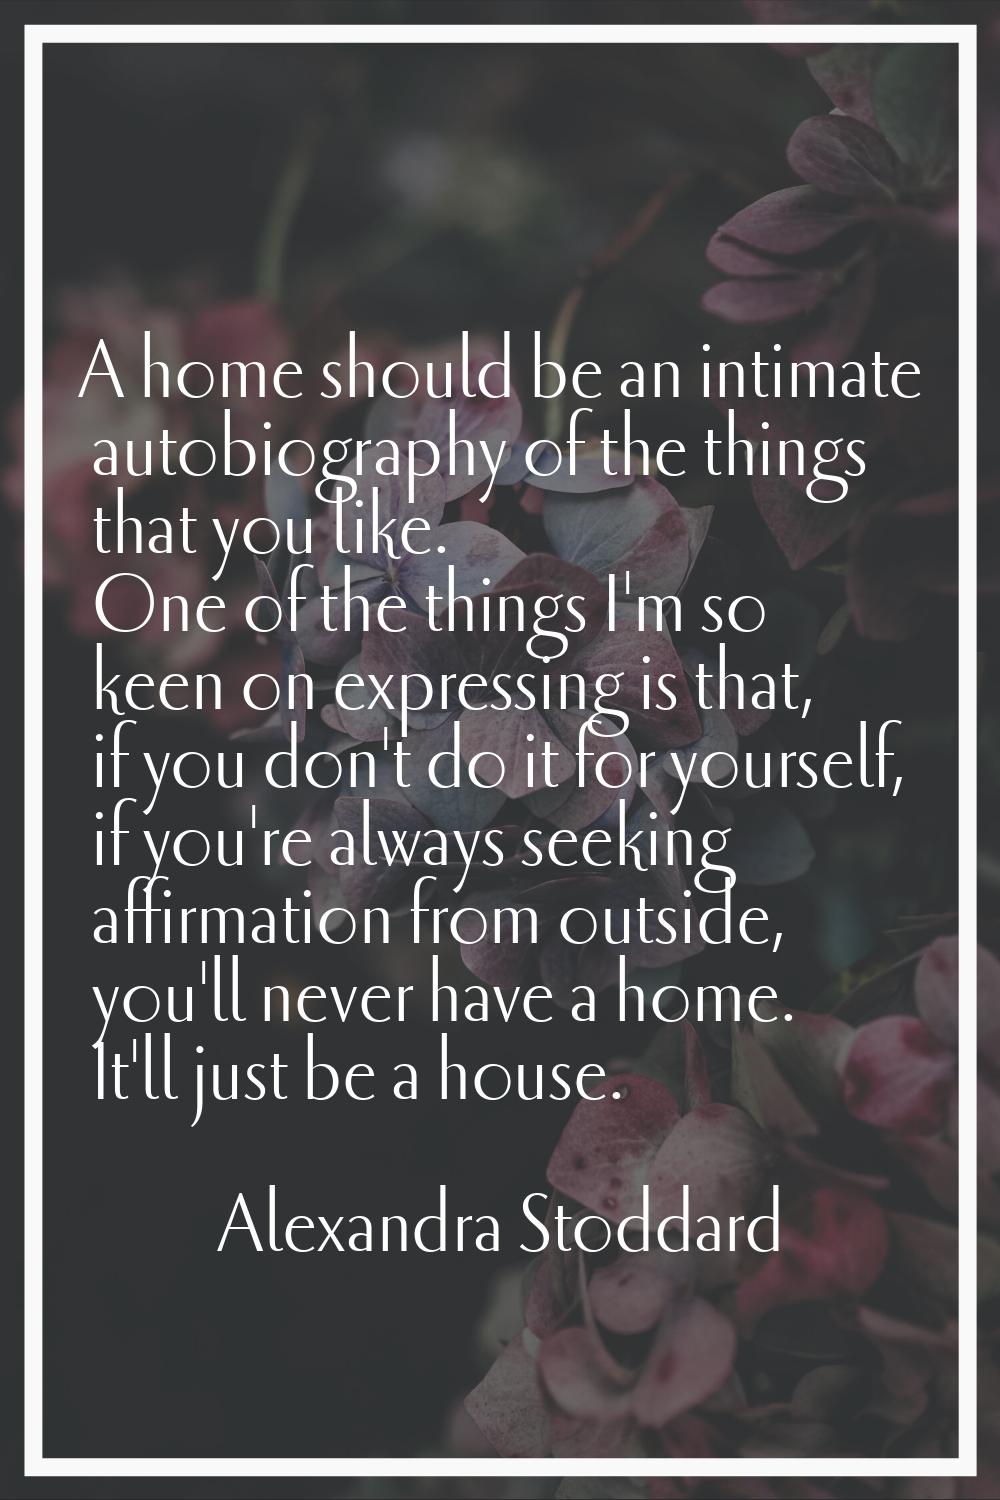 A home should be an intimate autobiography of the things that you like. One of the things I'm so ke